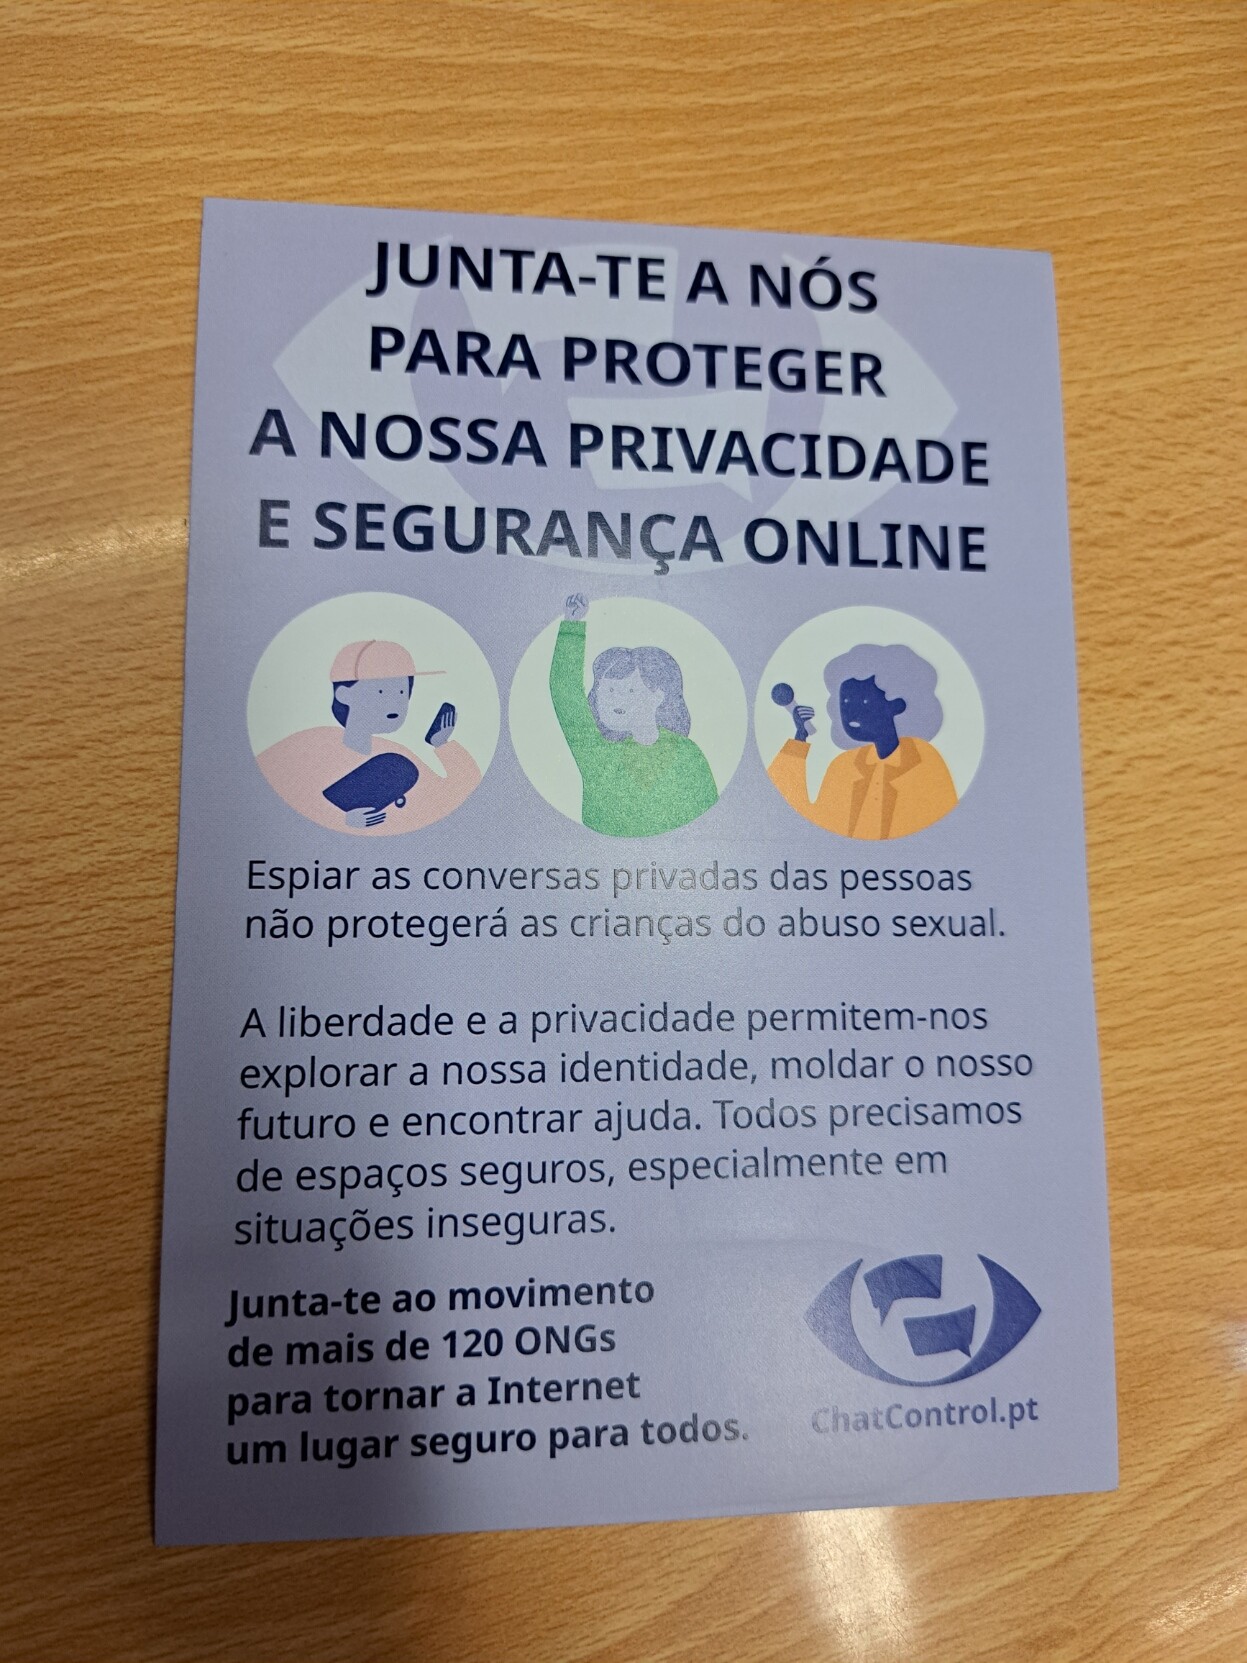 Flyer promoting the chatcontrol.pt website